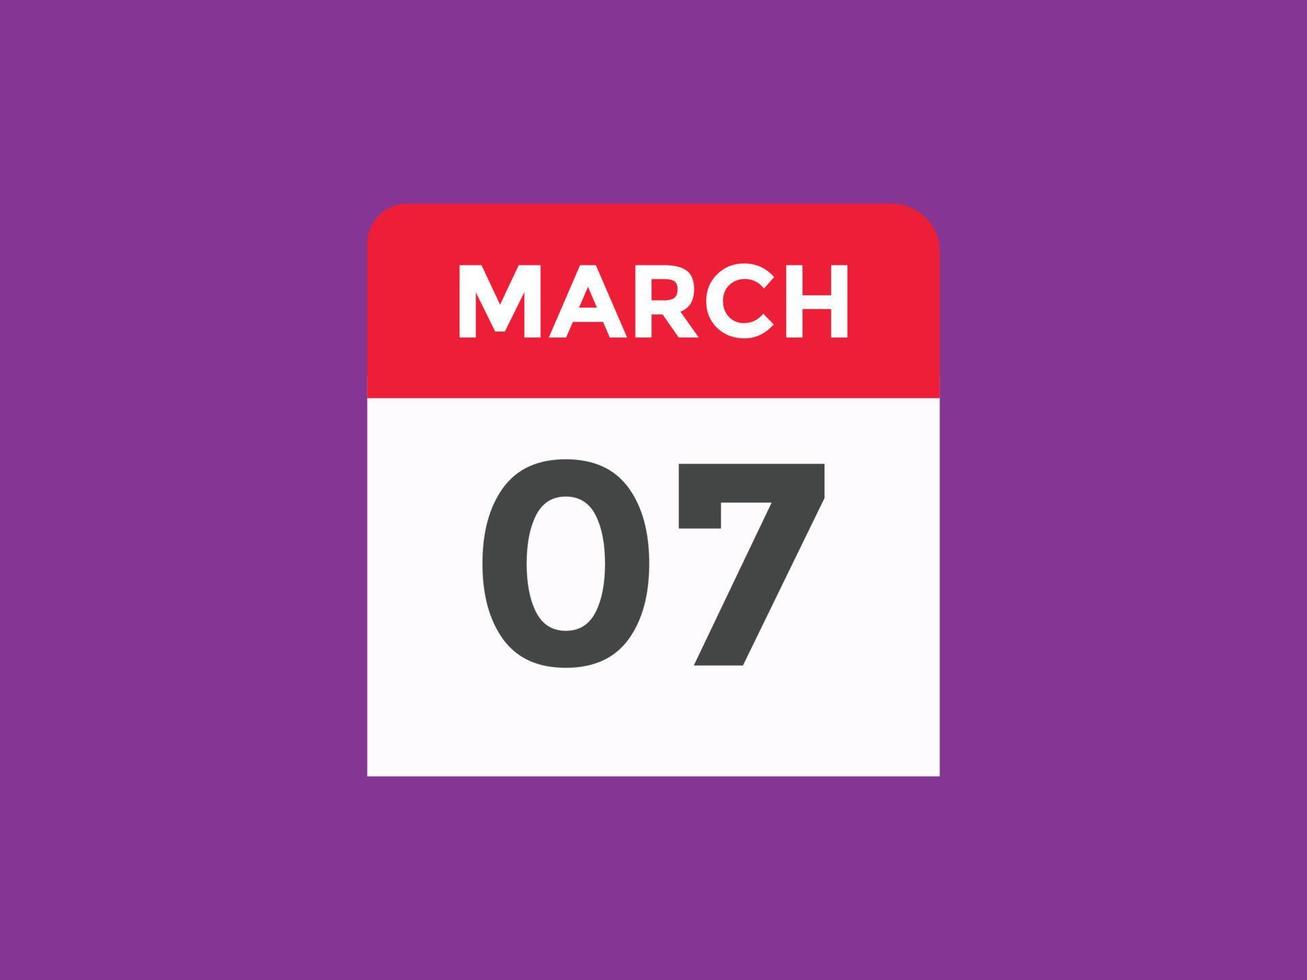 march 7 calendar reminder. 7th march daily calendar icon template. Calendar 7th march icon Design template. Vector illustration